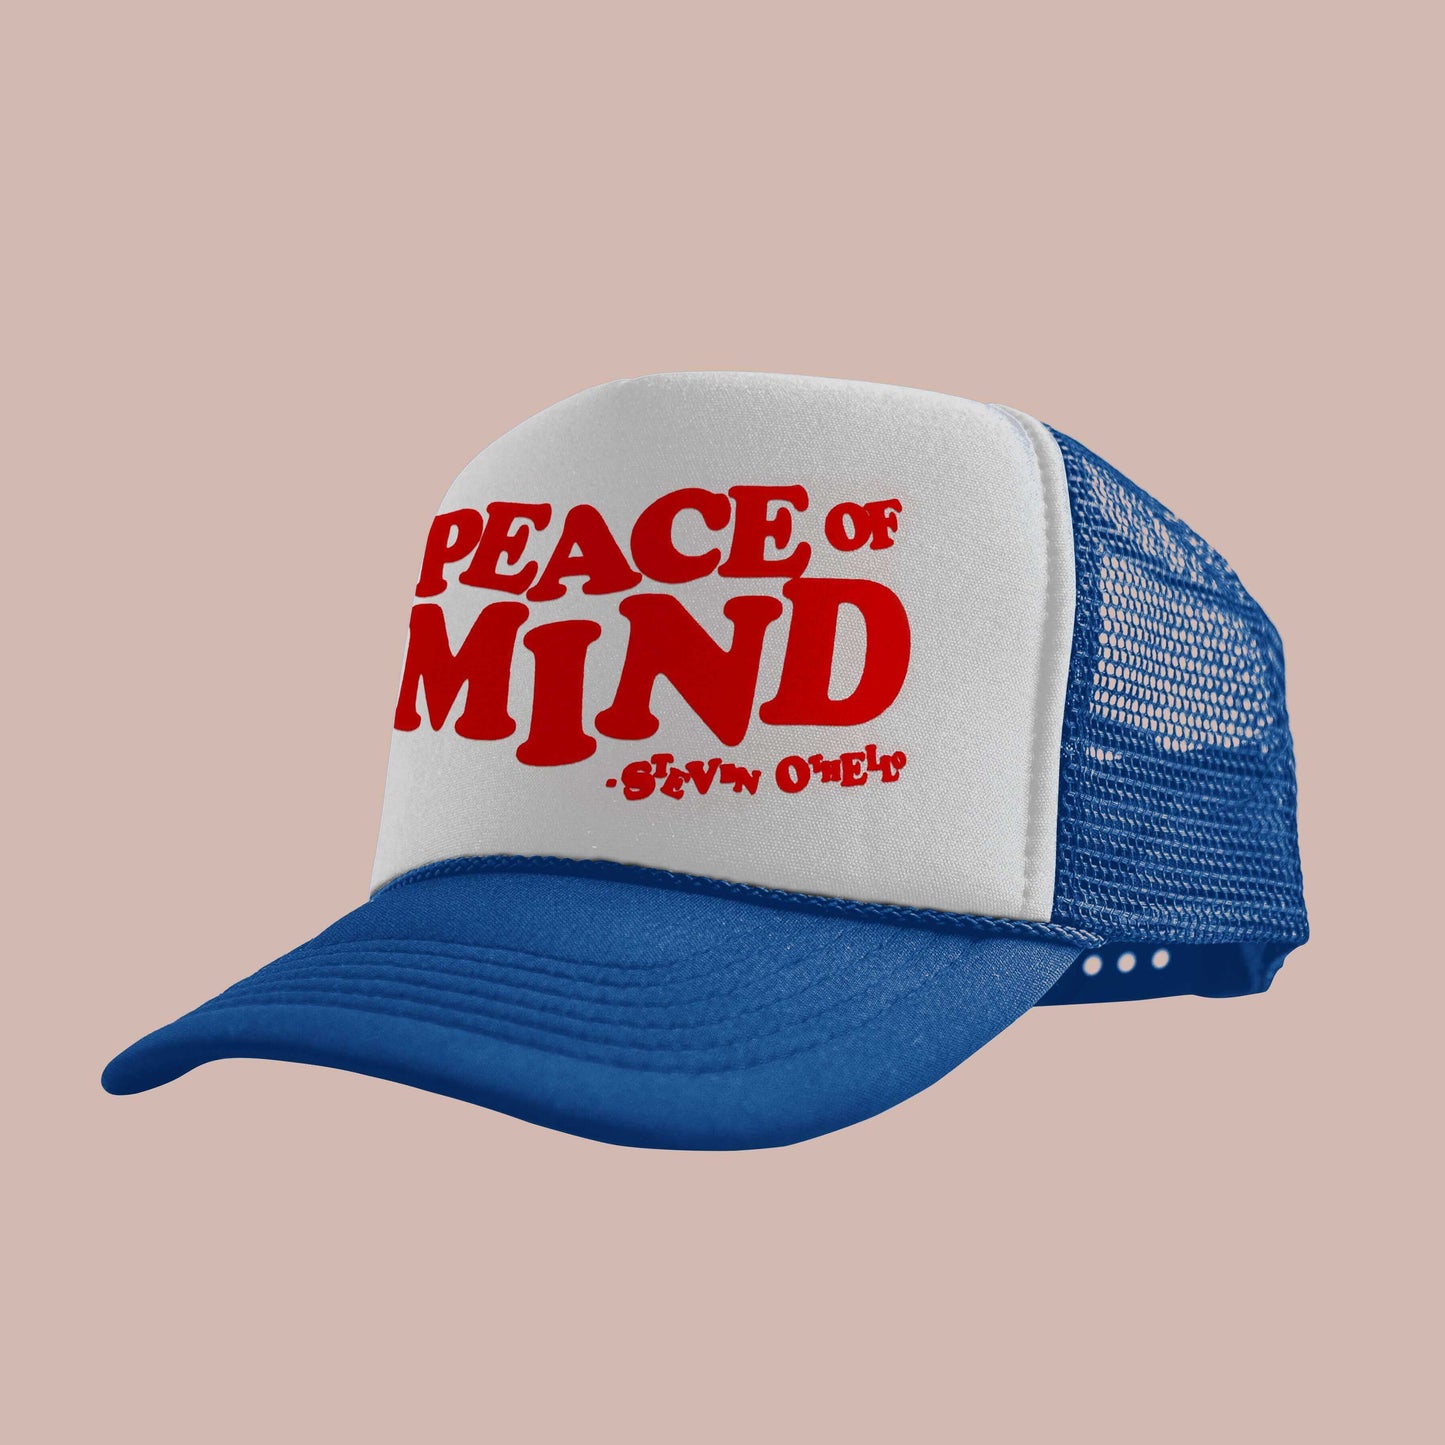 "Peace Of Mind" Trucker Hat by Steven Othello